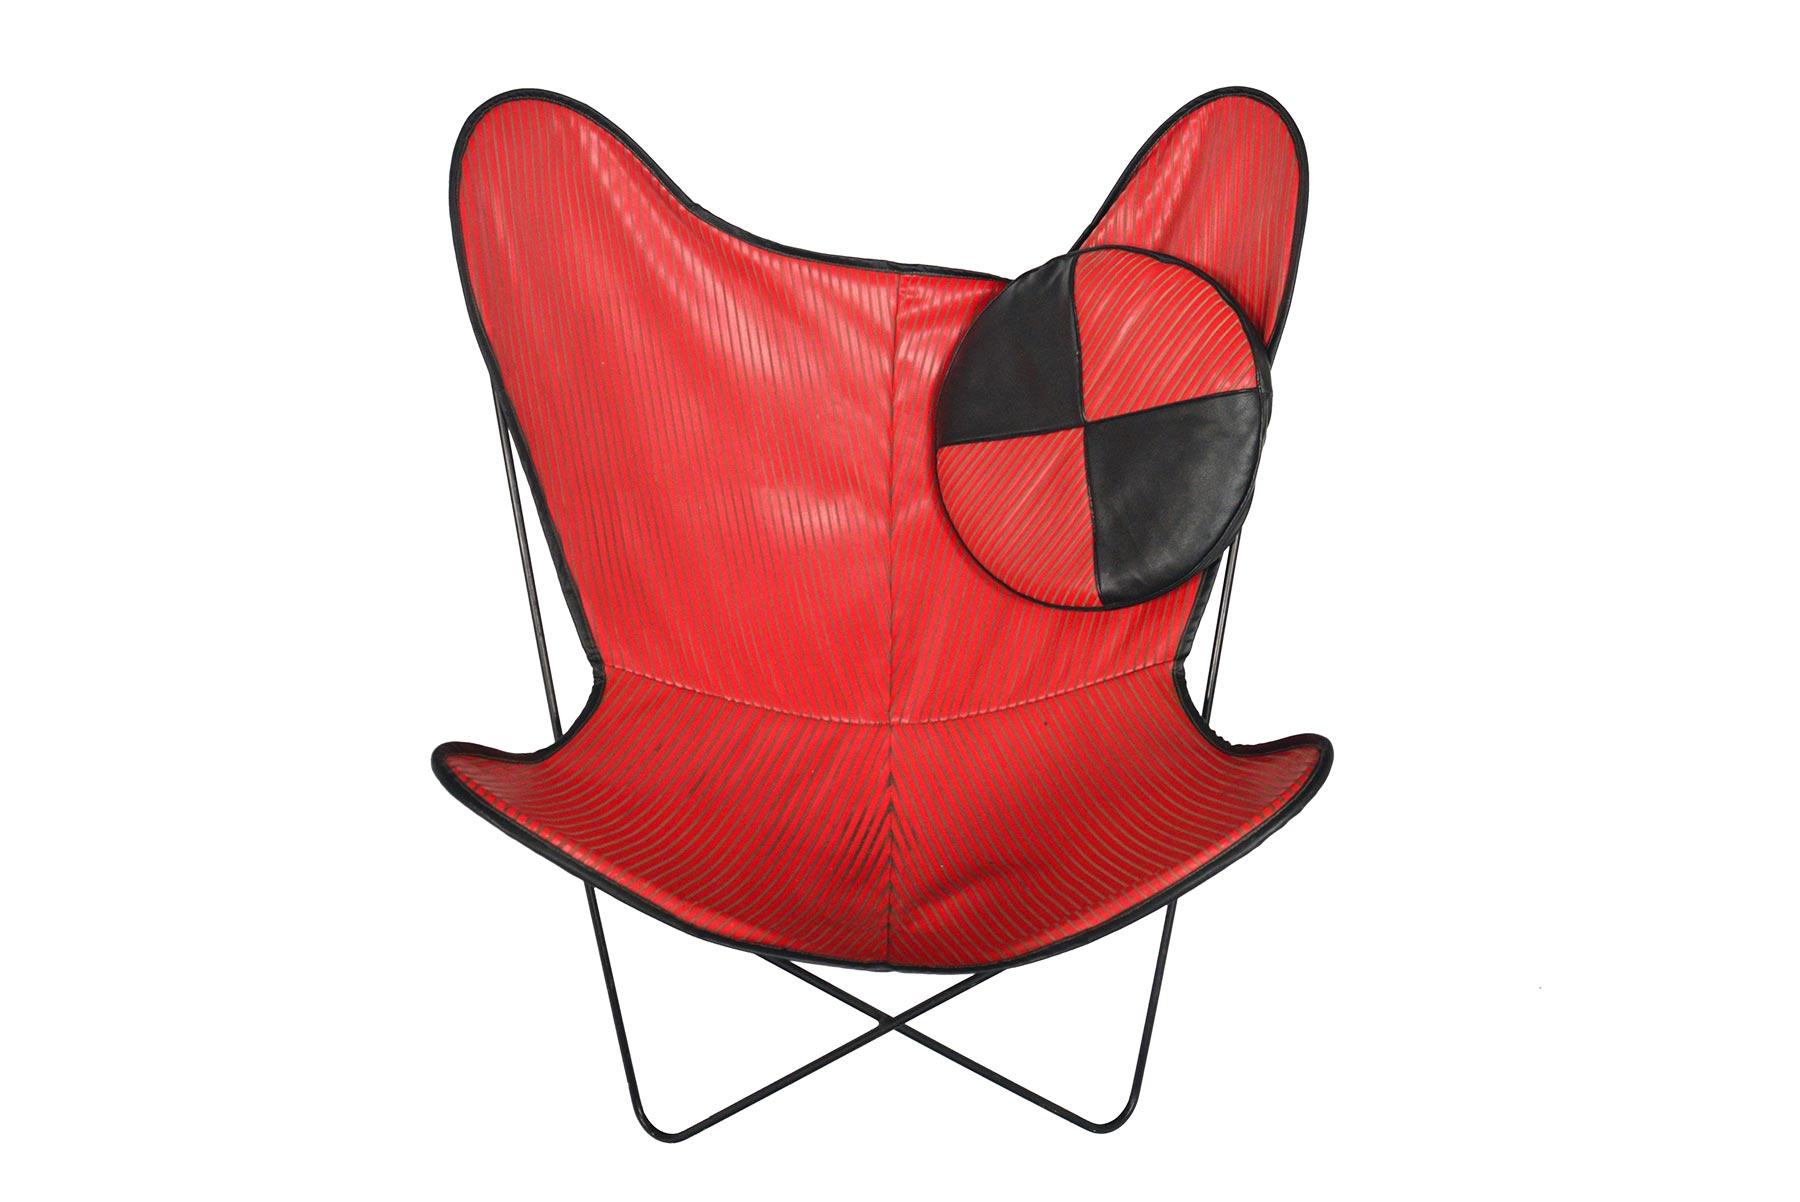 Originally designed in 1938, the butterfly chair has endured as a sought after element for architectural interiors. This completely original 1950s piece hails from Denmark and showcases a period perfect color blocked upholstery. Black vinyl trims a